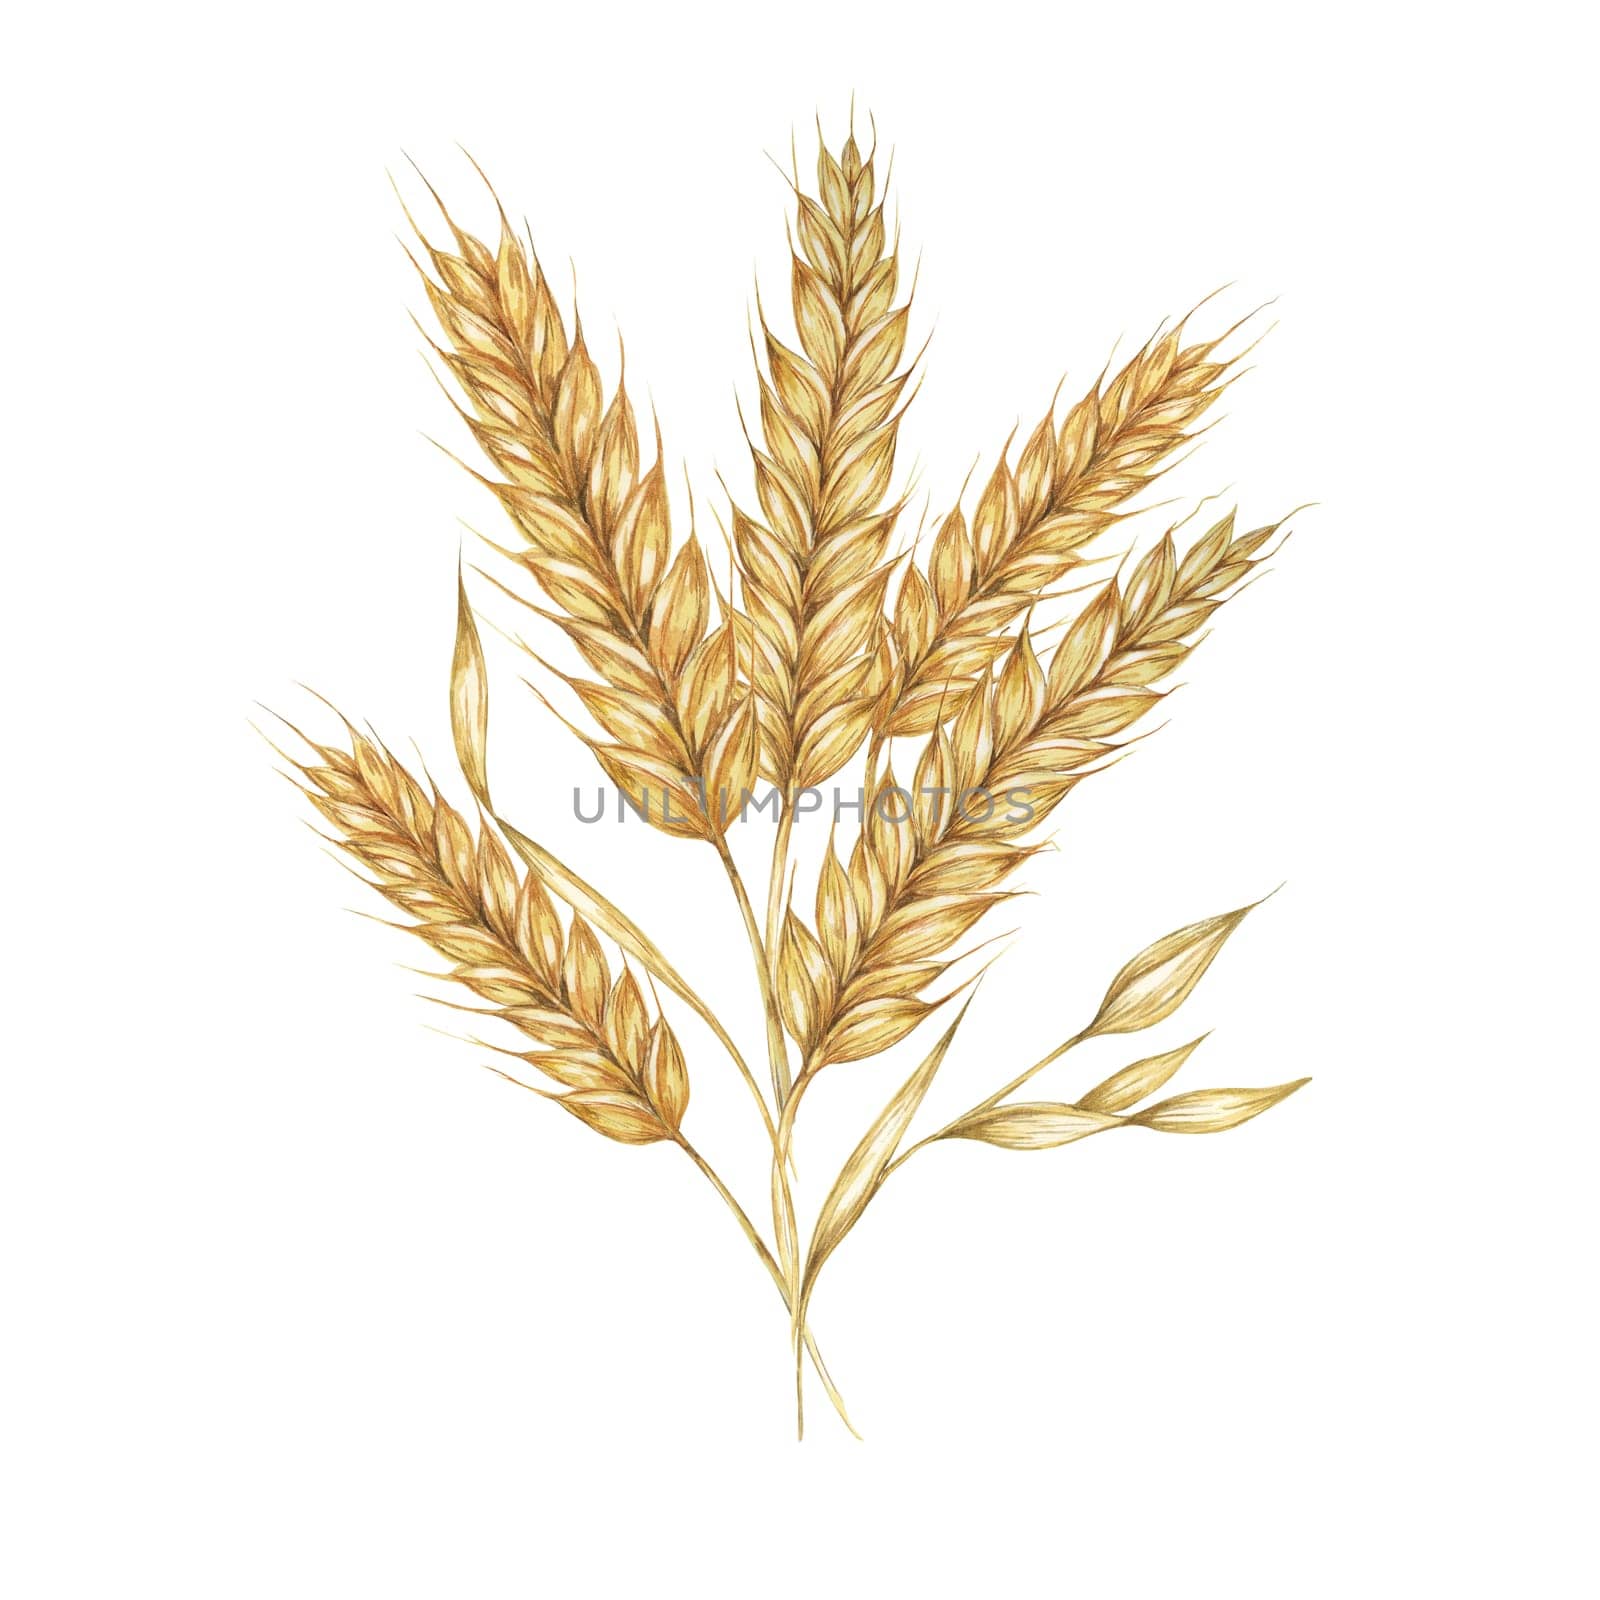 Barley spikes bouquet, cereal ears, wheat stalks. Grains for Shavuot, Thanksgiving, Oktoberfest clipart. Watercolor illustration for bread, beer by Fofito